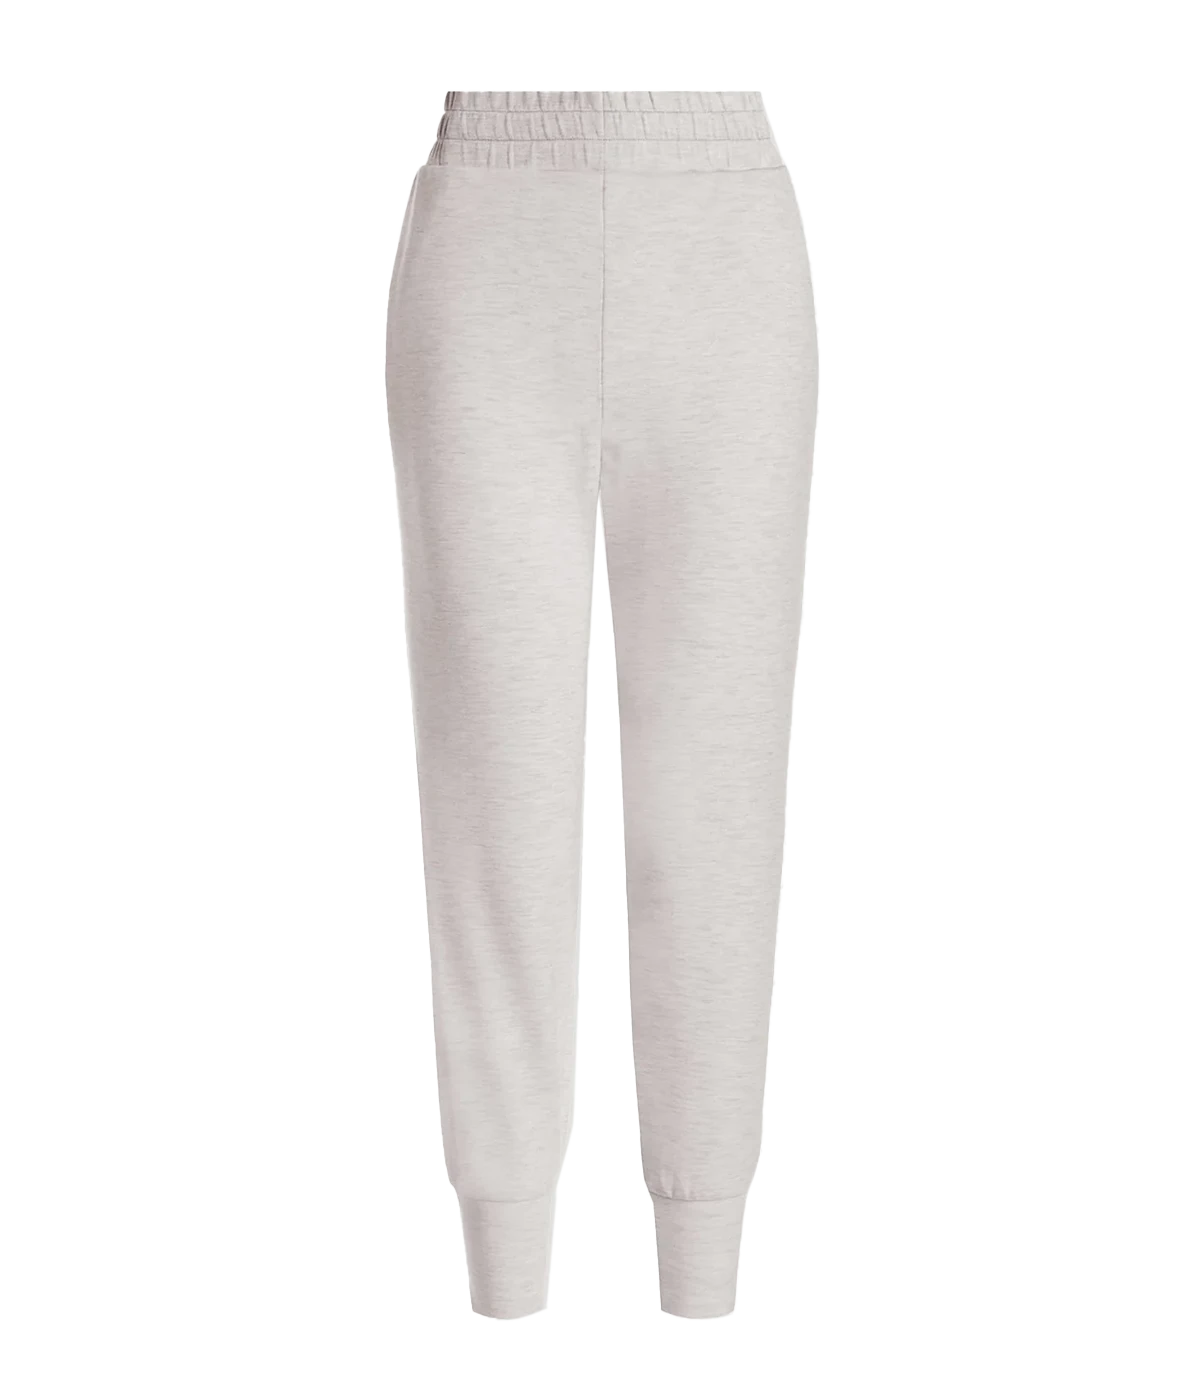 The Slim Cuff Pant in Ivory Mal